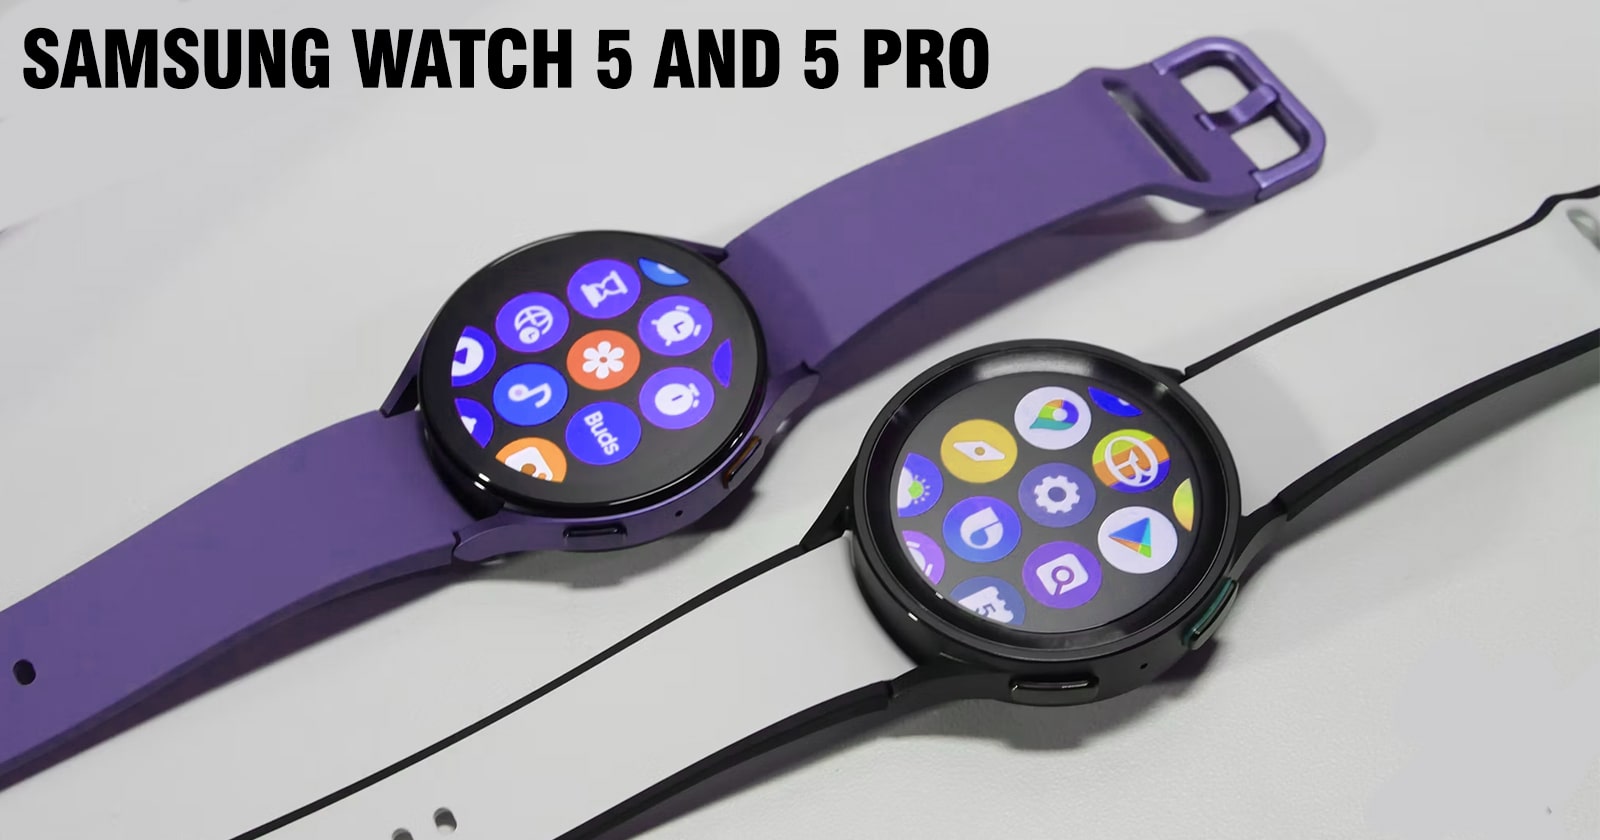 What Is the Difference Between Samsung Watch 5 and 5 Pro